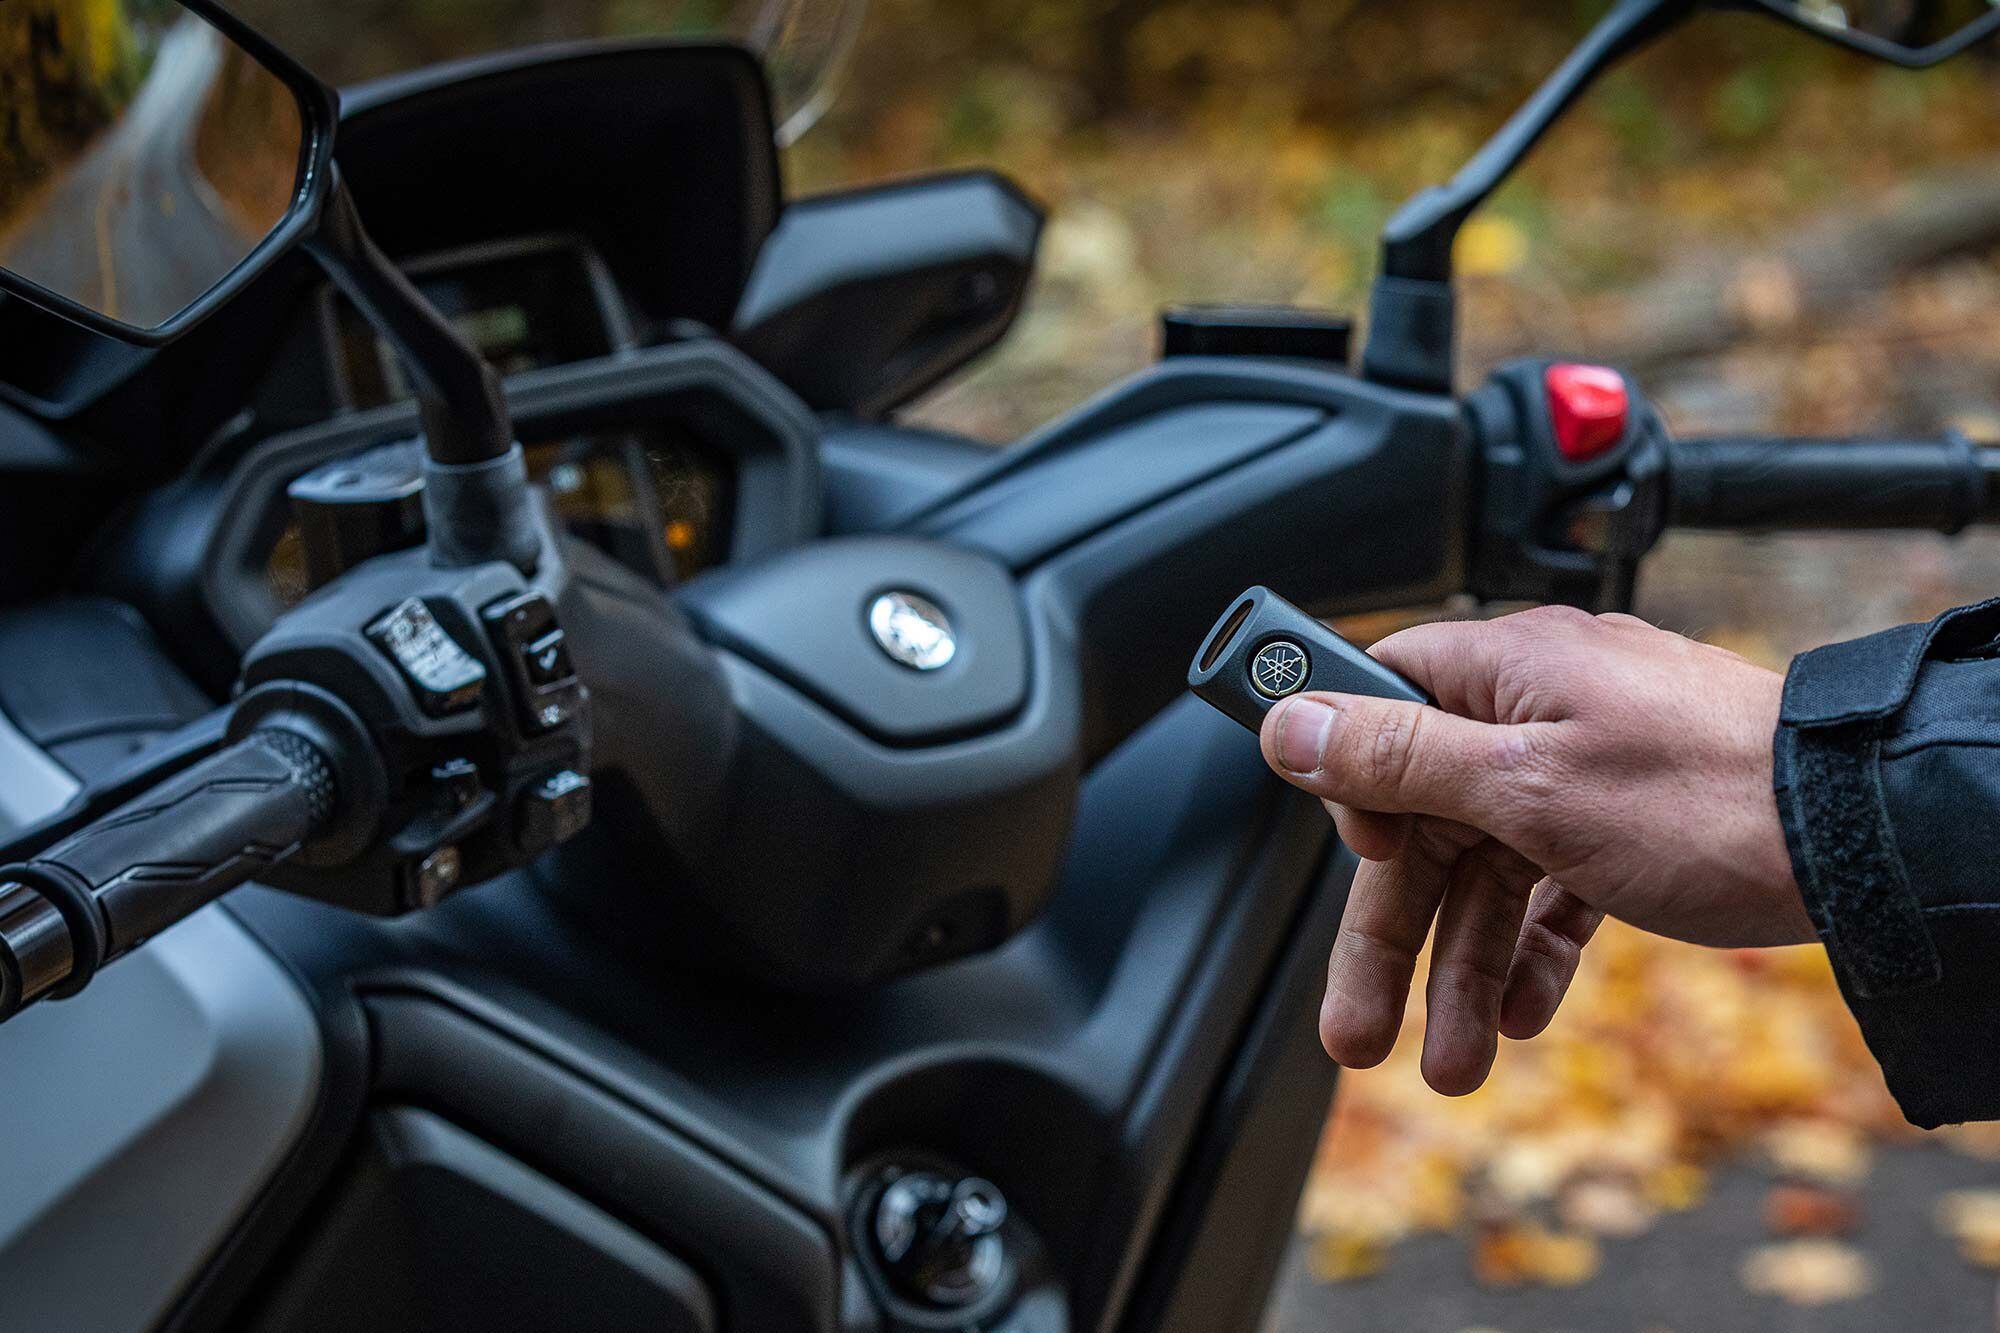 The XMAX will feature Yamaha Smart Key functionality.